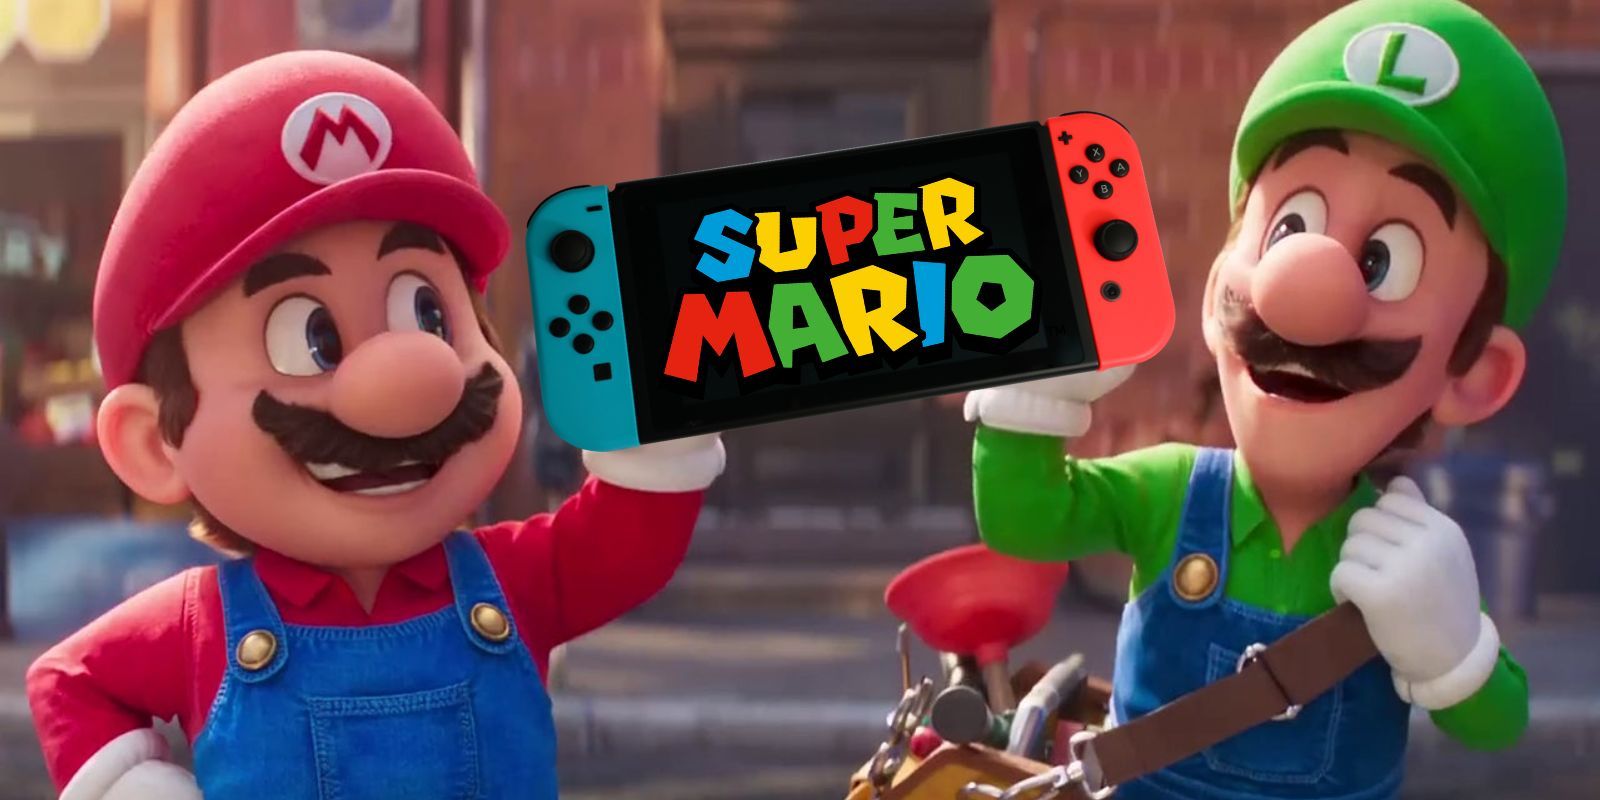 Mario and Luigi from the Mario movie, with an image of a Nintendo Switch superimposed over their raised hands and the Super Mario logo on the Switch screen